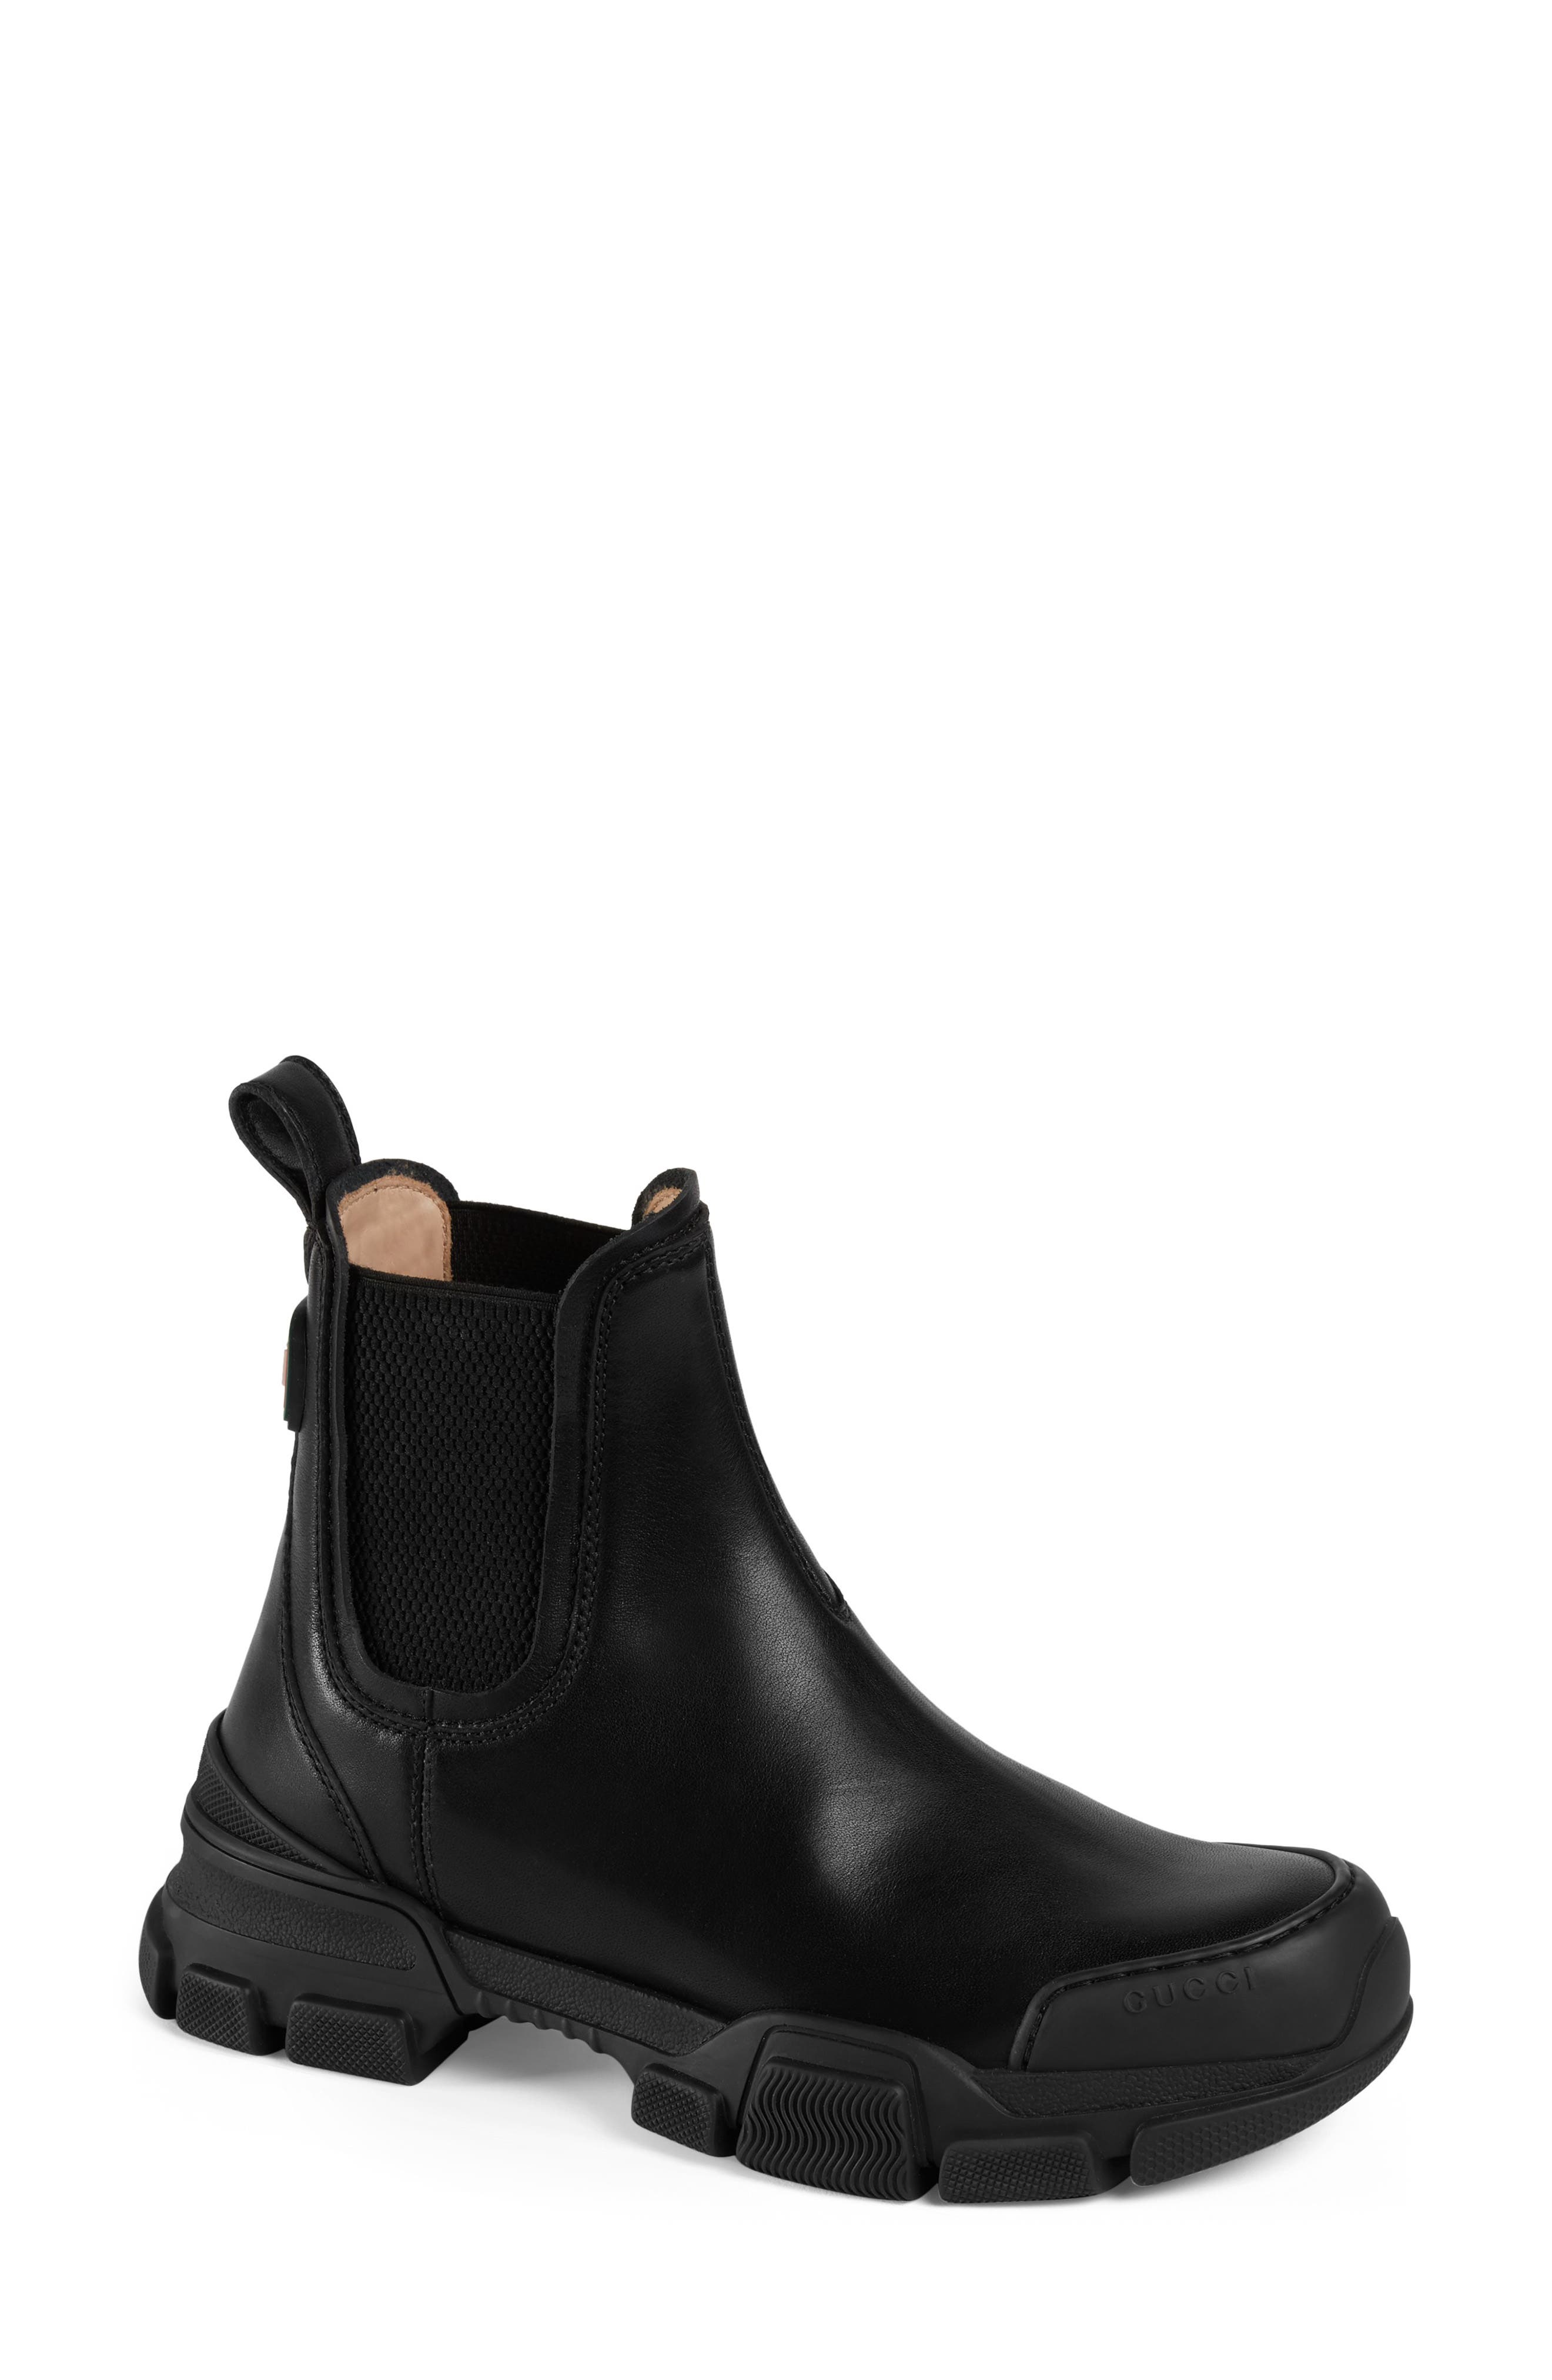 gucci women's boots nordstrom